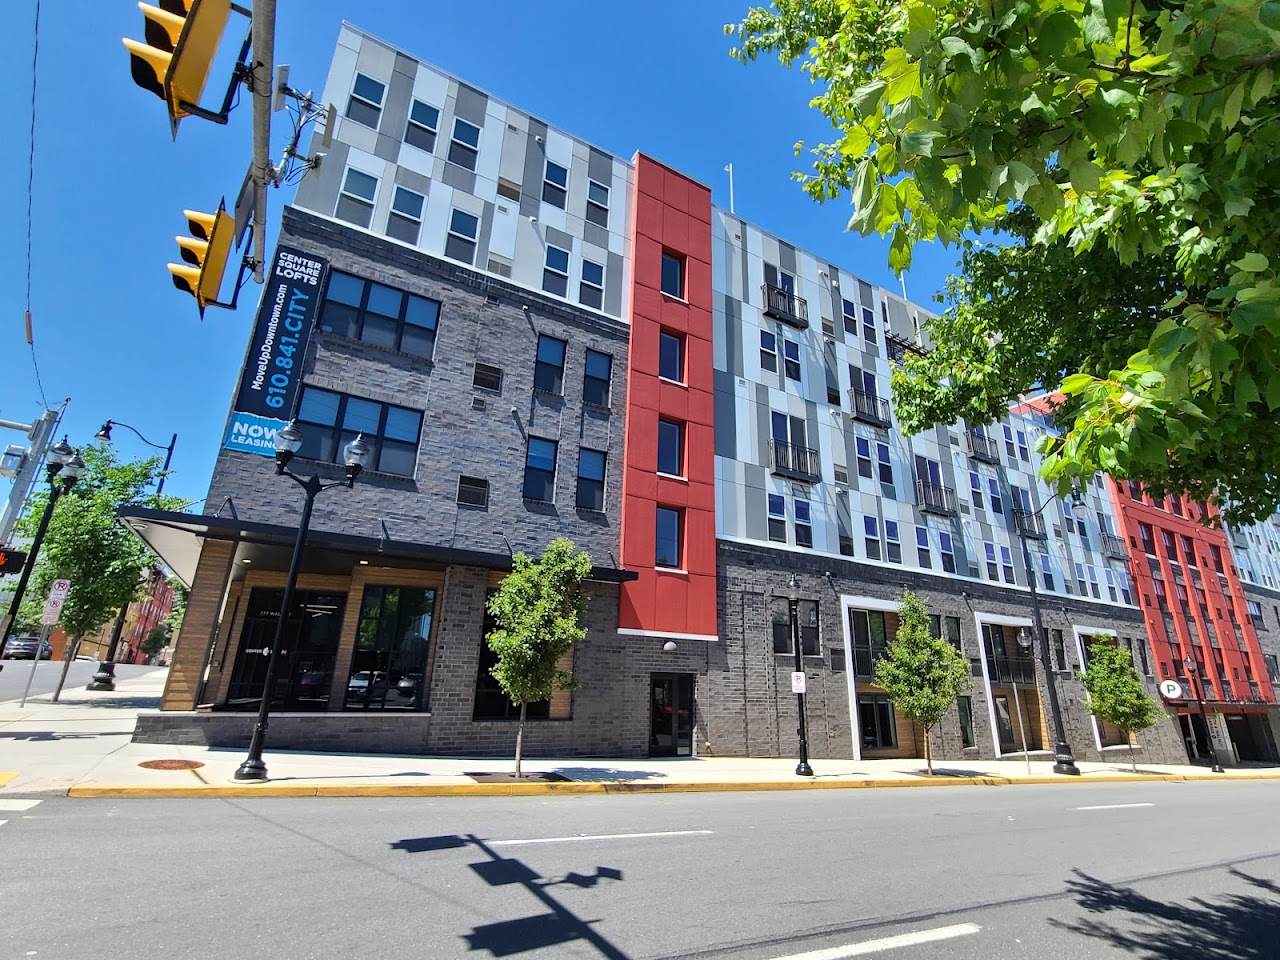 Photo of S 7TH ST APTS. Affordable housing located at 1112 S SEVENTH ST ALLENTOWN, PA 18103